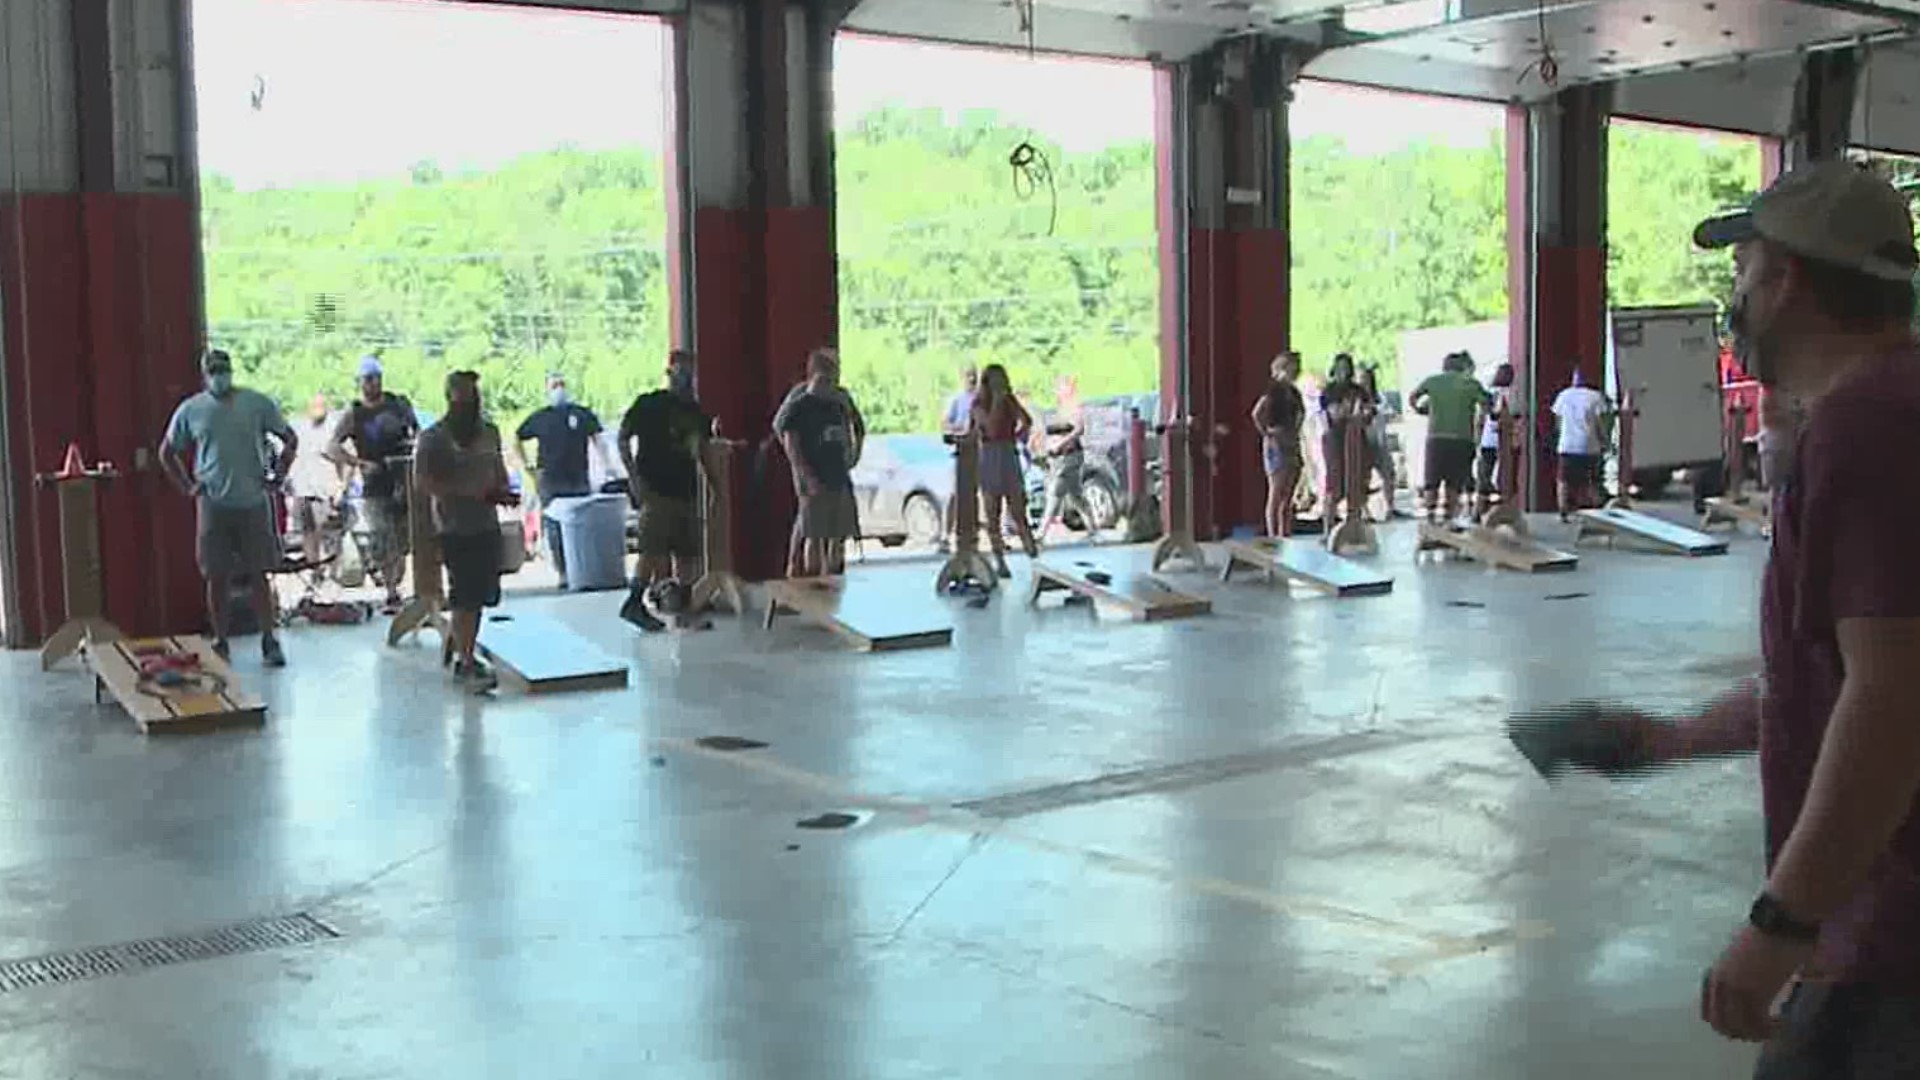 The Springbrook Volunteer Fire Company put together a cornhole tournament Sunday in the hopes of raising some cash.